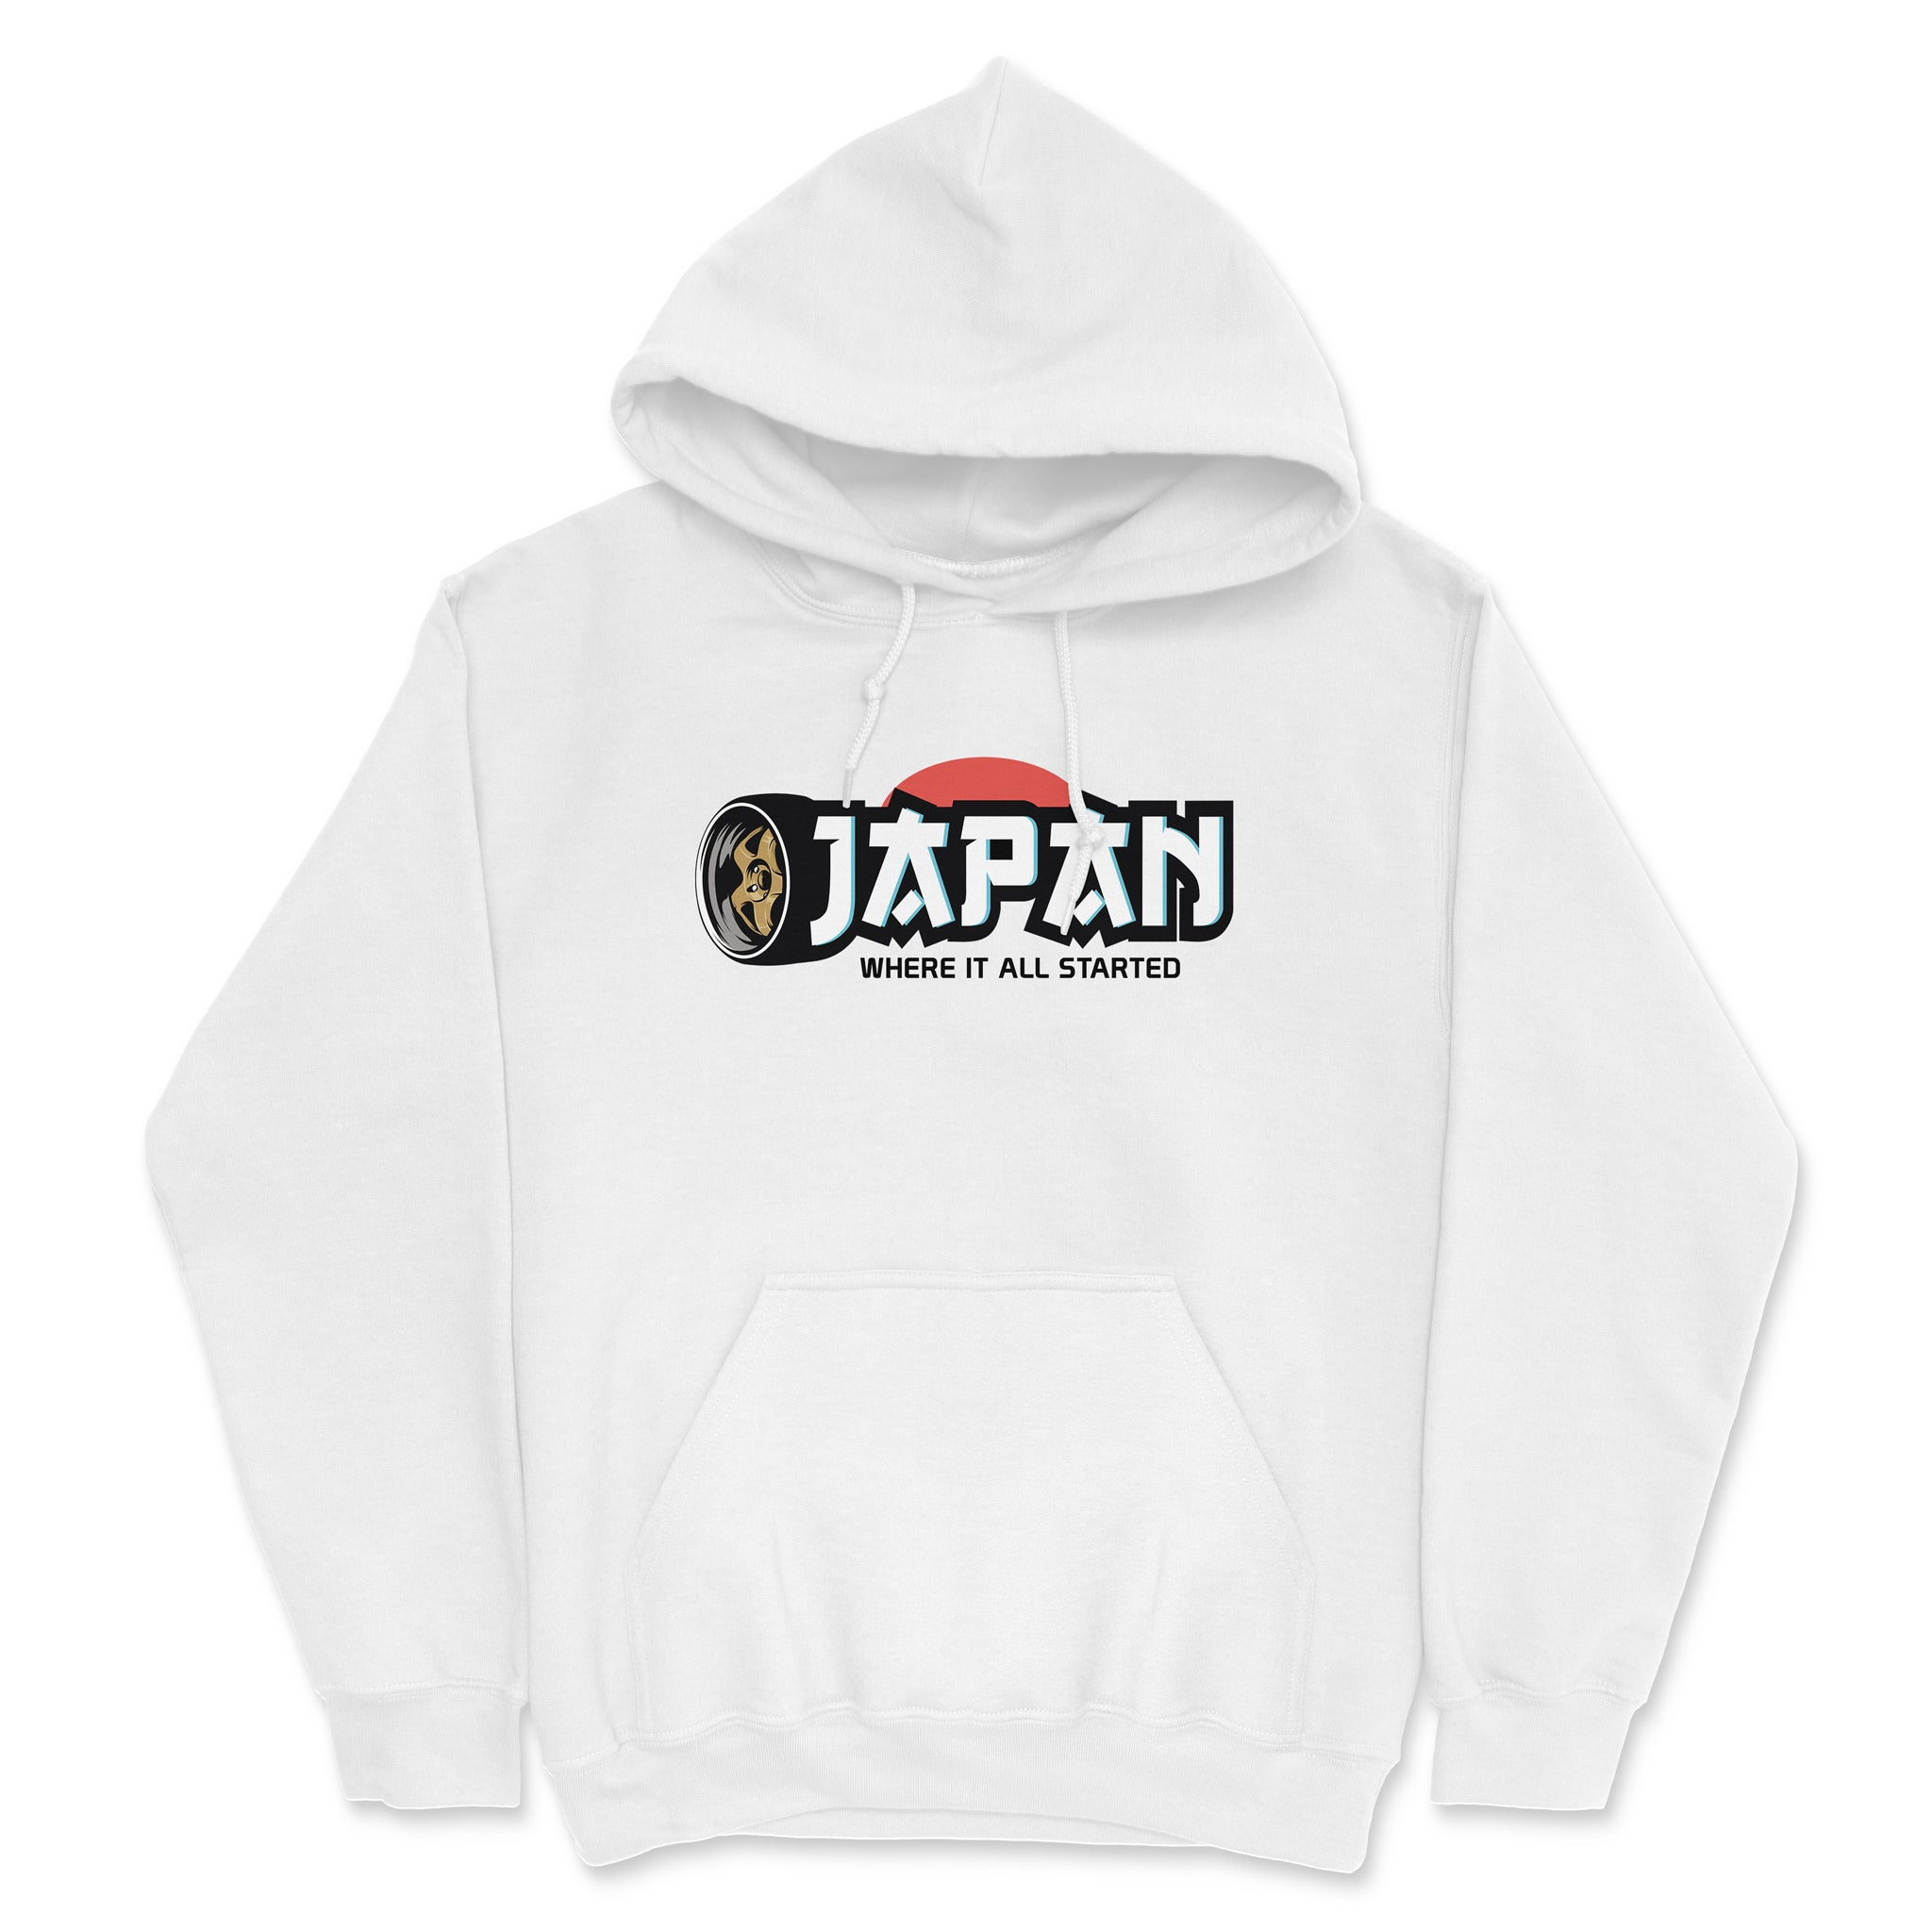 Japan - Where It All Started - Car Hoodie - White.